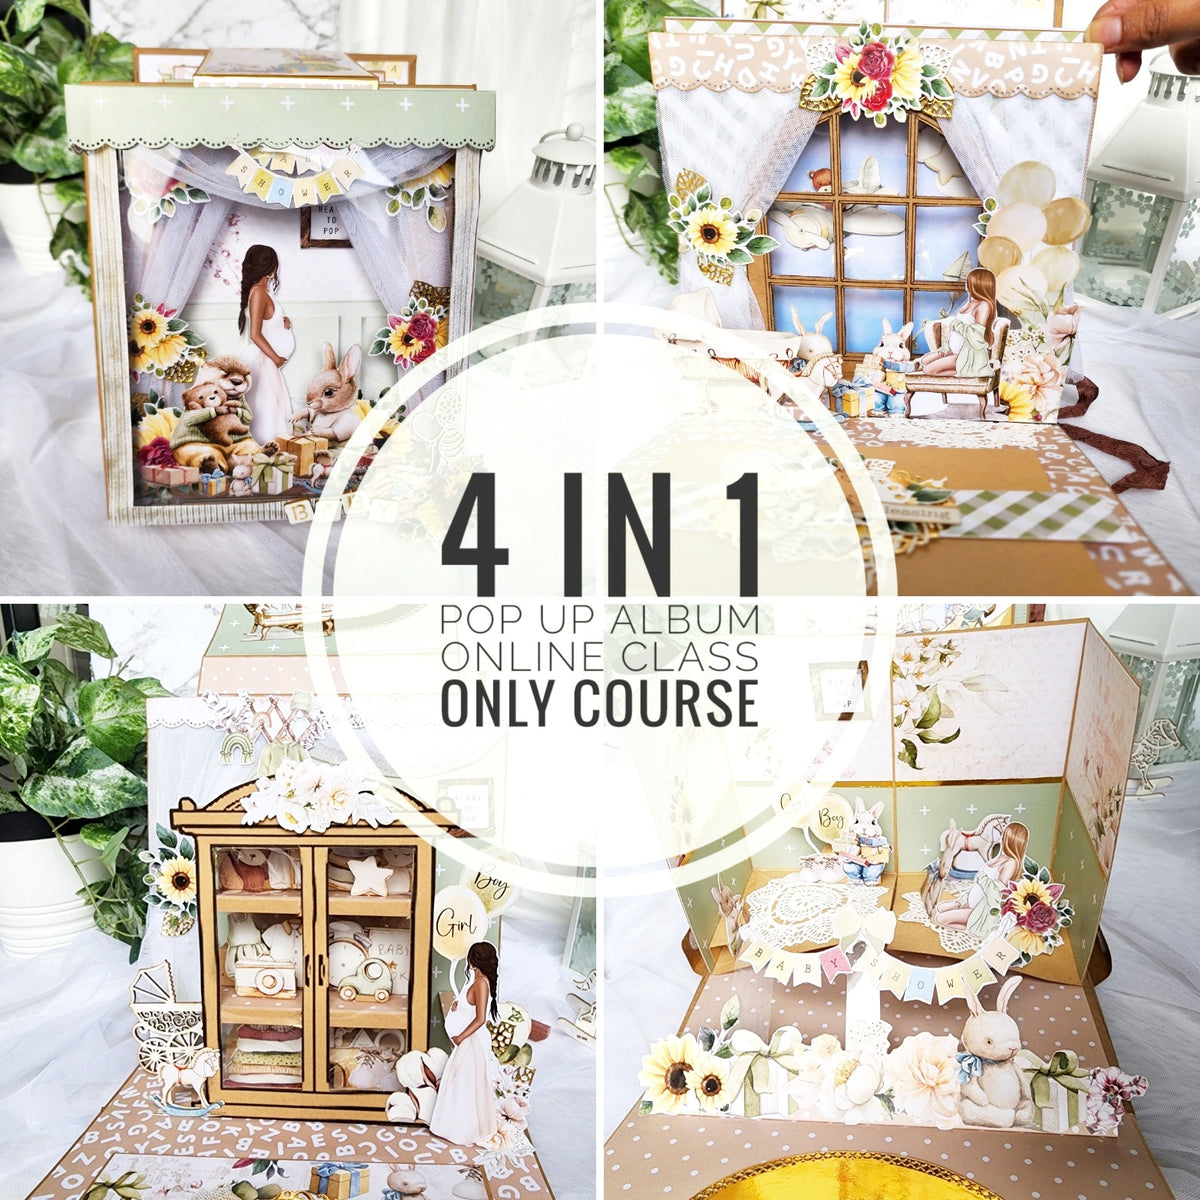 4 in 1 Pregnancy Pop Up Album - ONLY COURSE